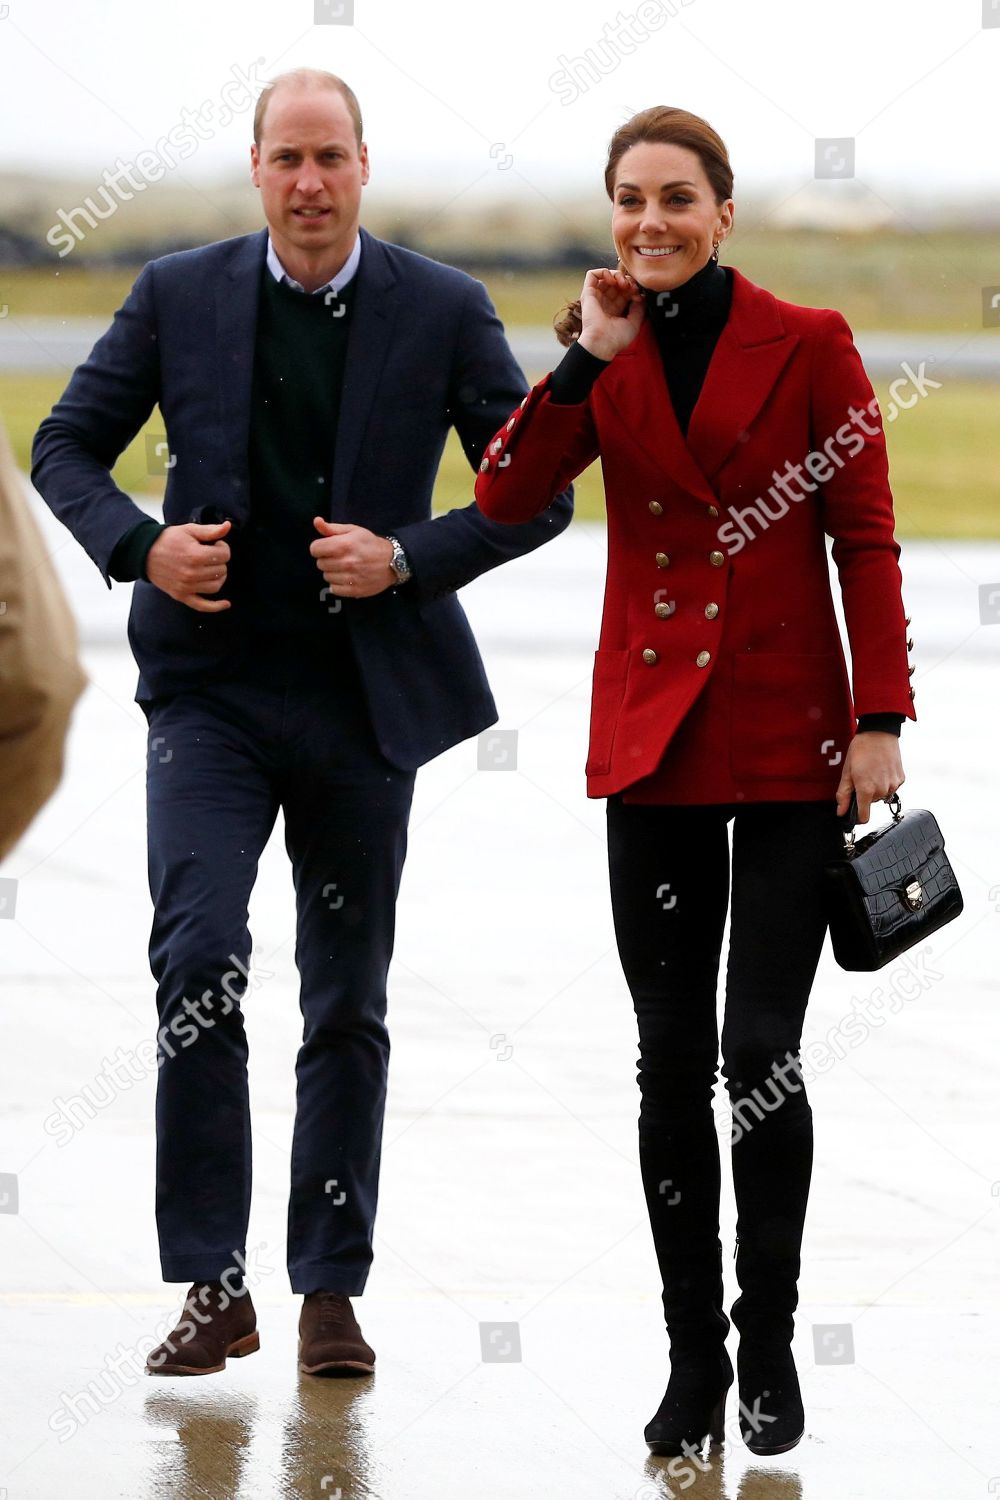 prince-william-and-catherine-duchess-of-cambridge-visit-to-wales-uk-shutterstock-editorial-10231469h.jpg